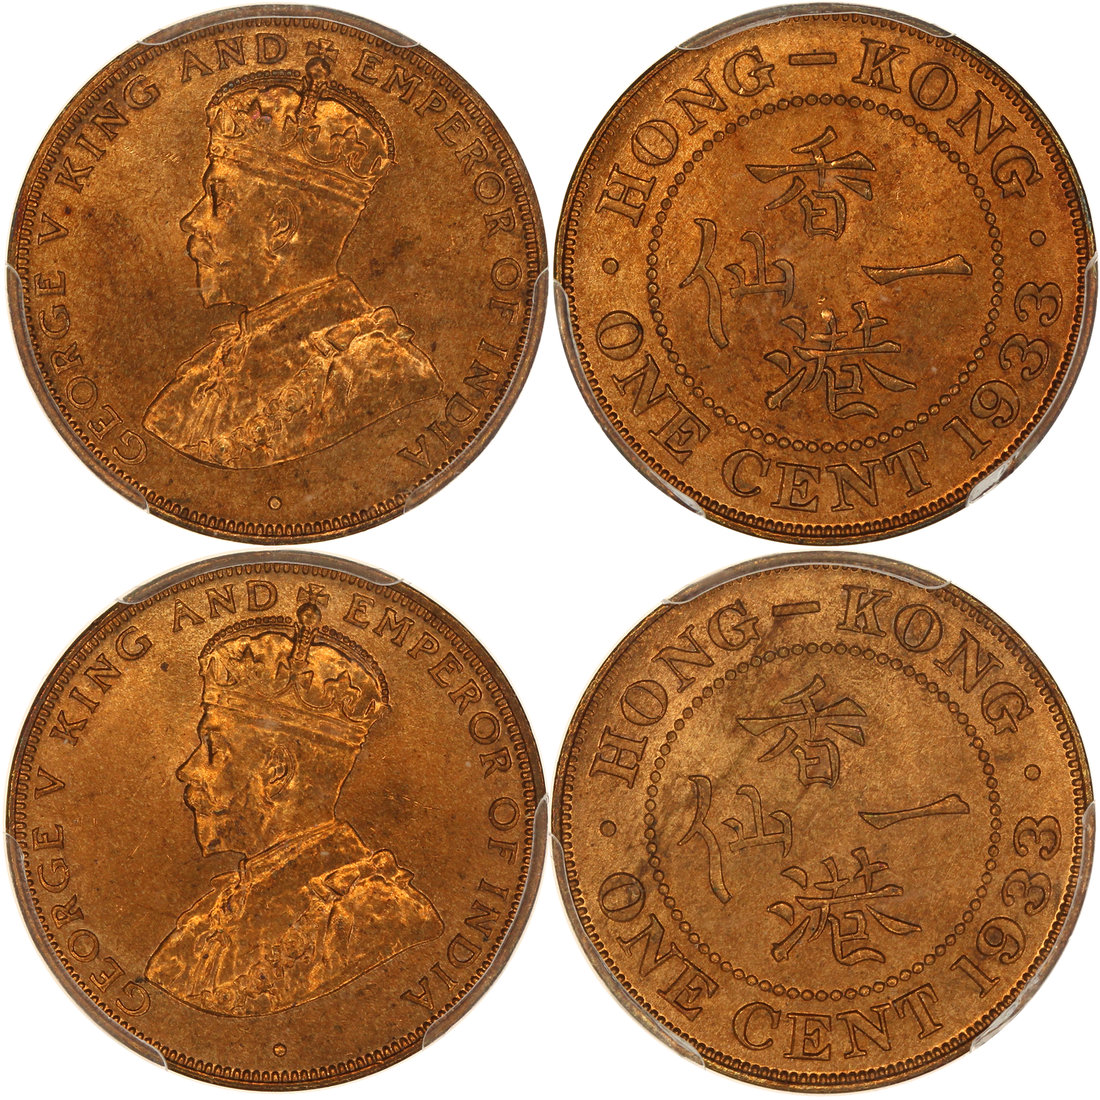 Hong Kong, a pair of bronze 1 cent, 1933, George V on obverse,